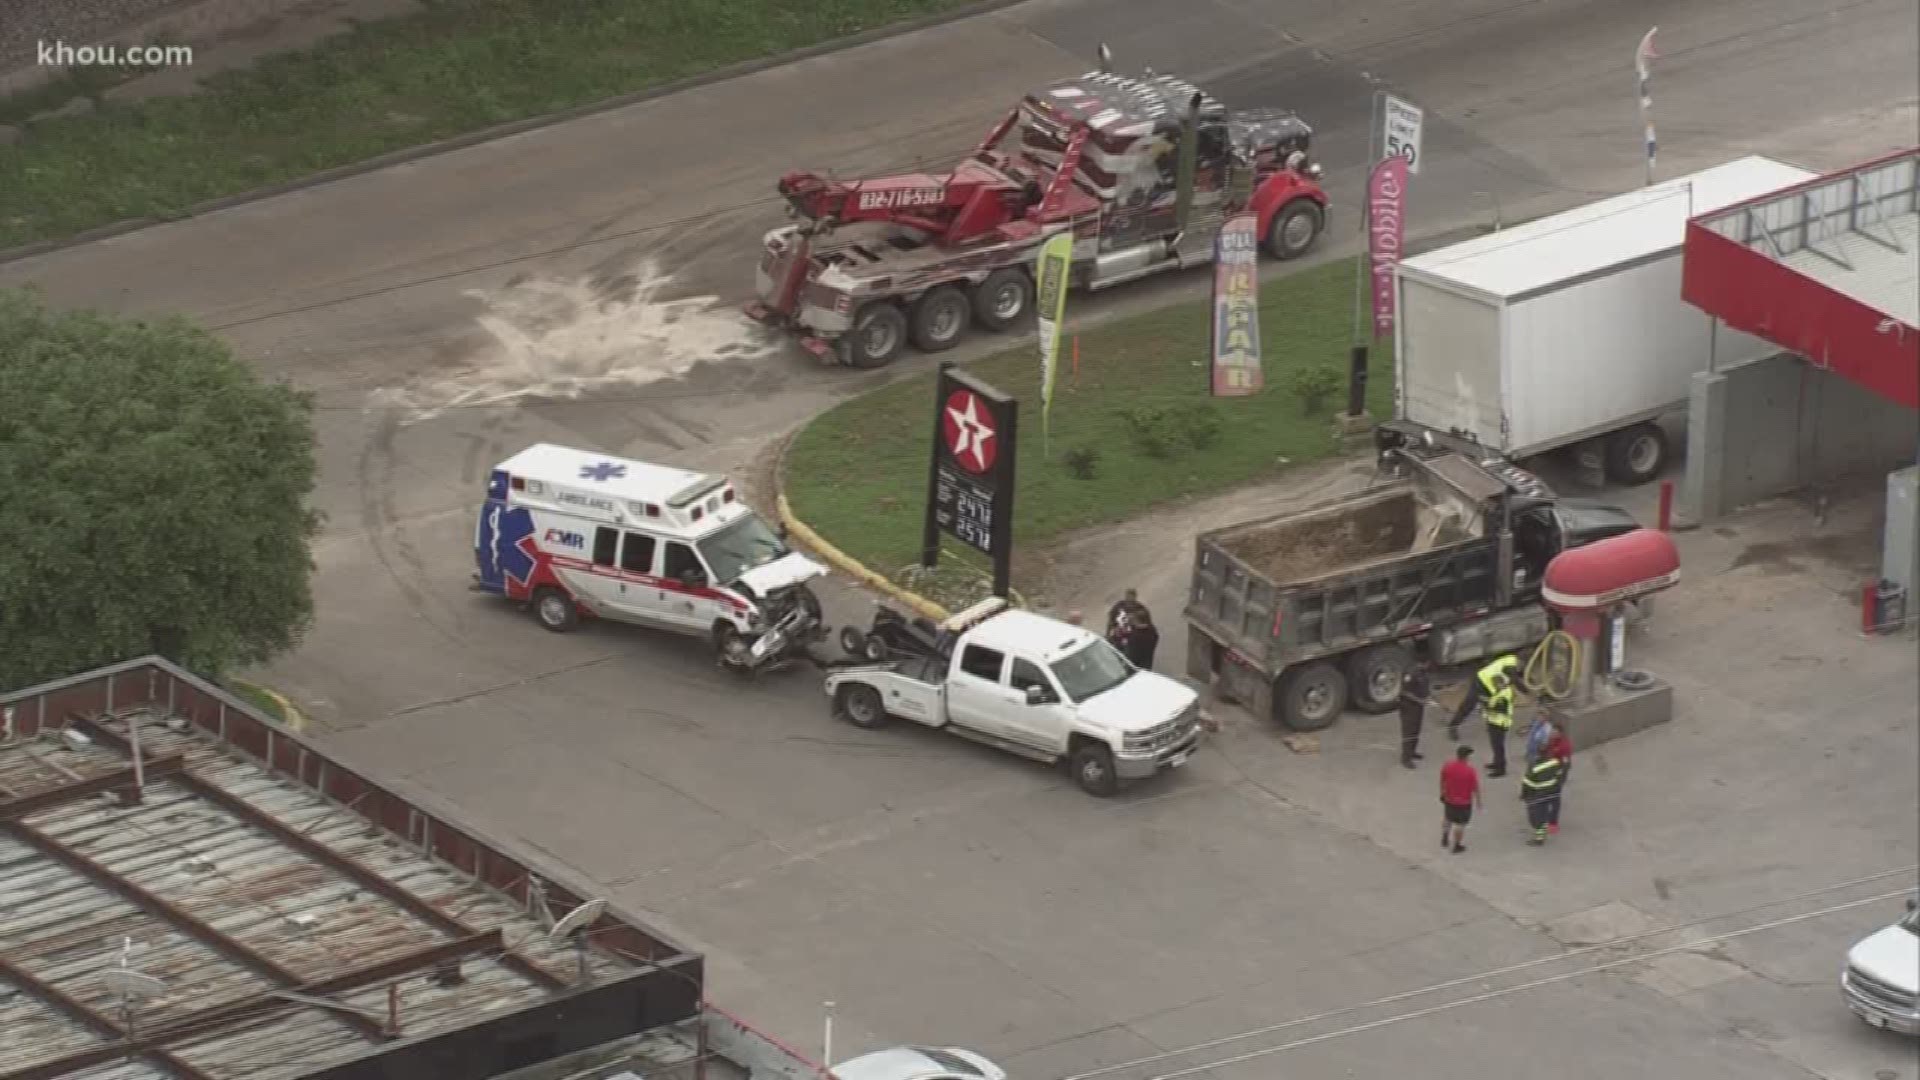 Two people were taken to the hospital Thursday after an ambulance and a dump truck collided in northeast Harris County, sources said.